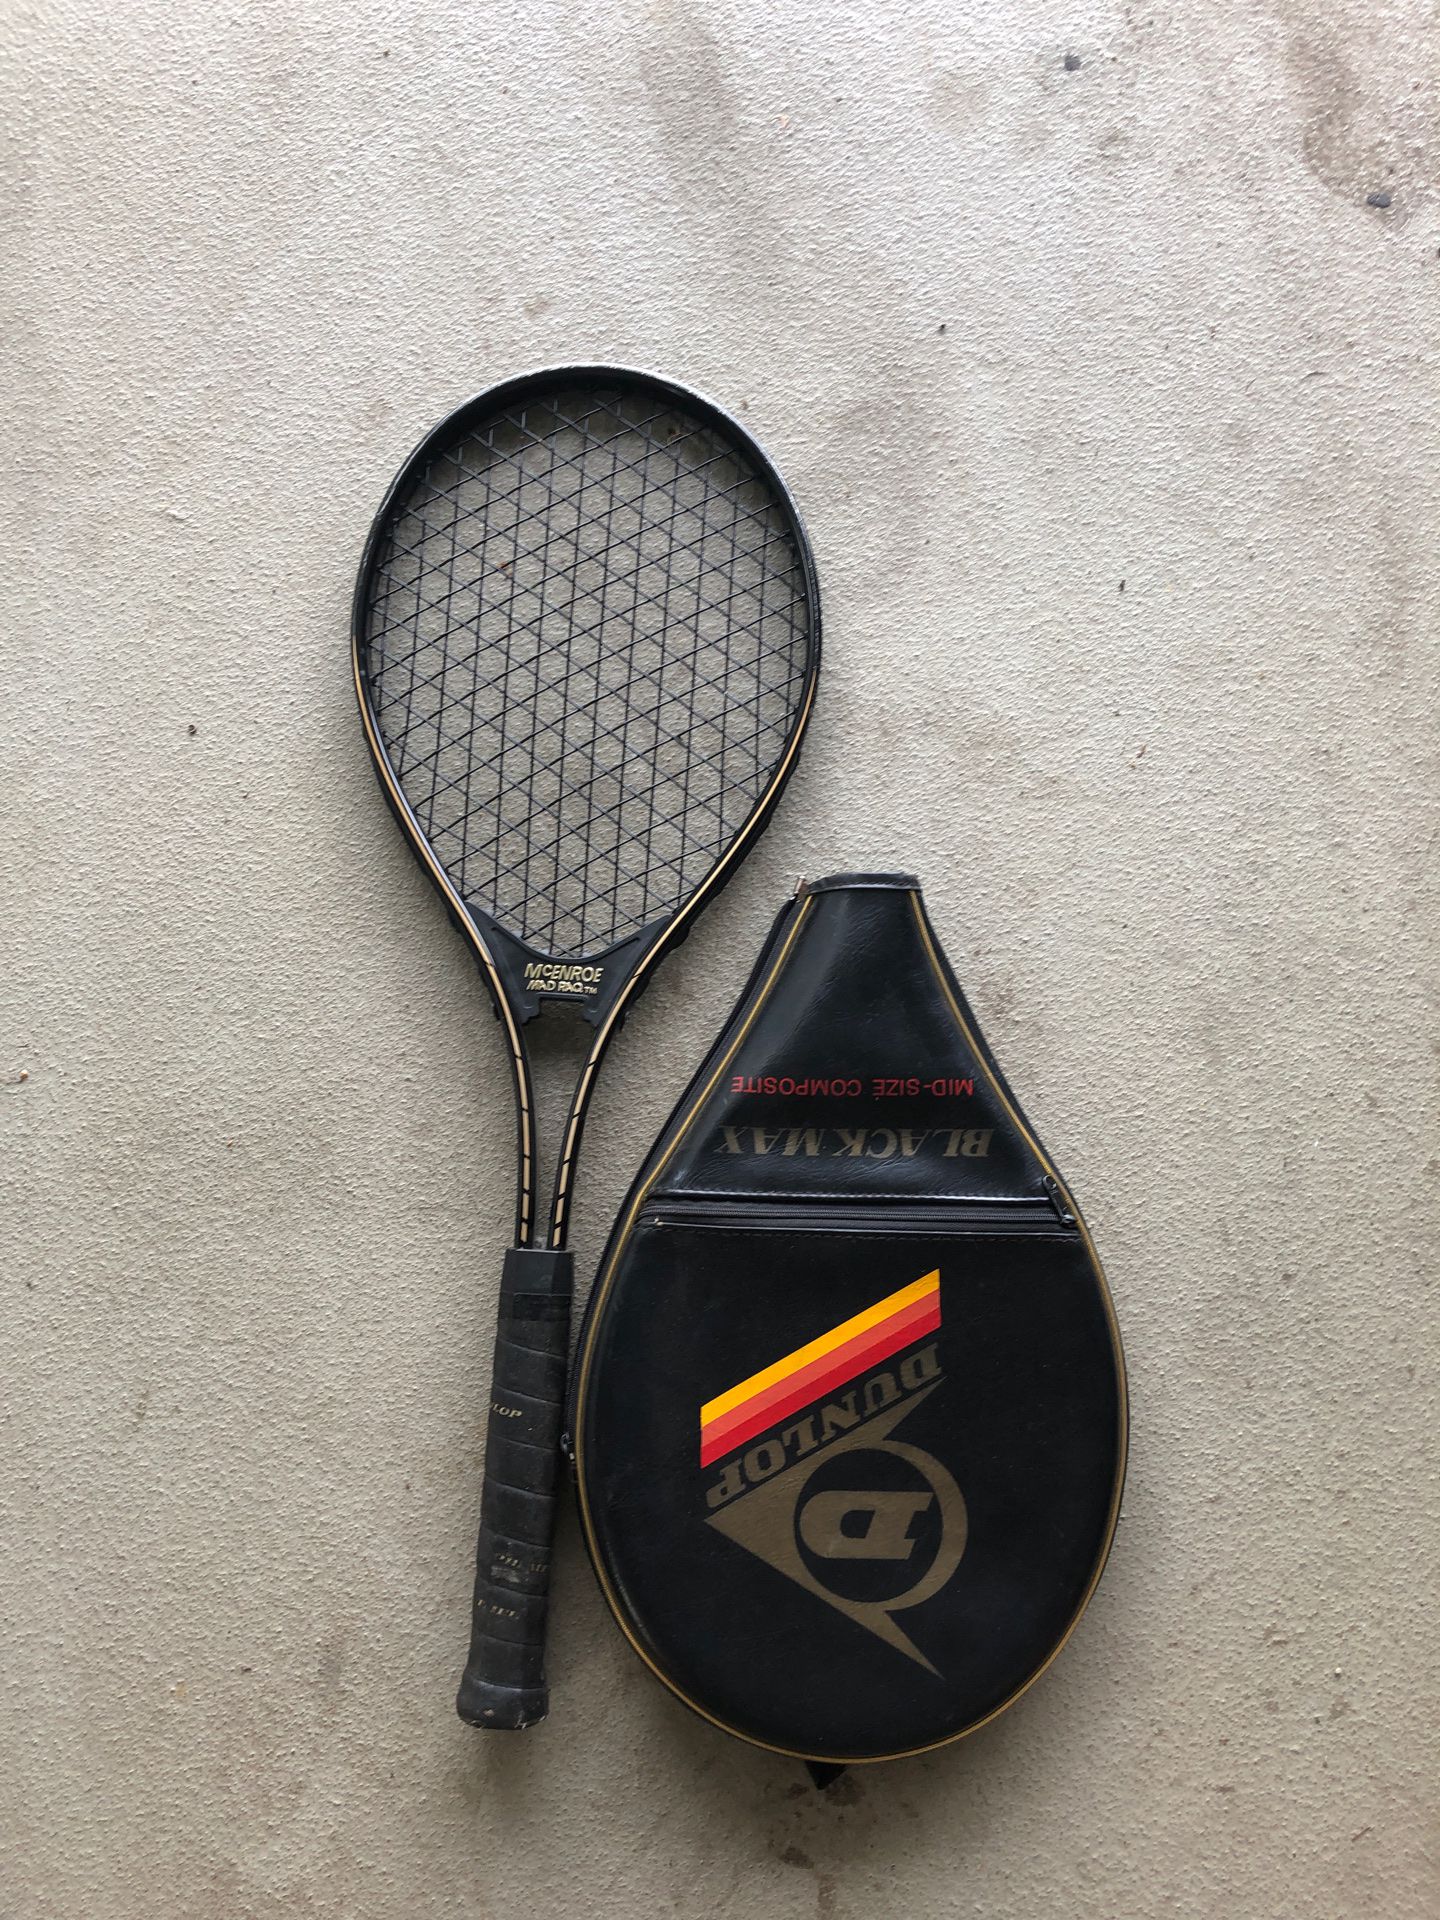 Tennis racket with cover